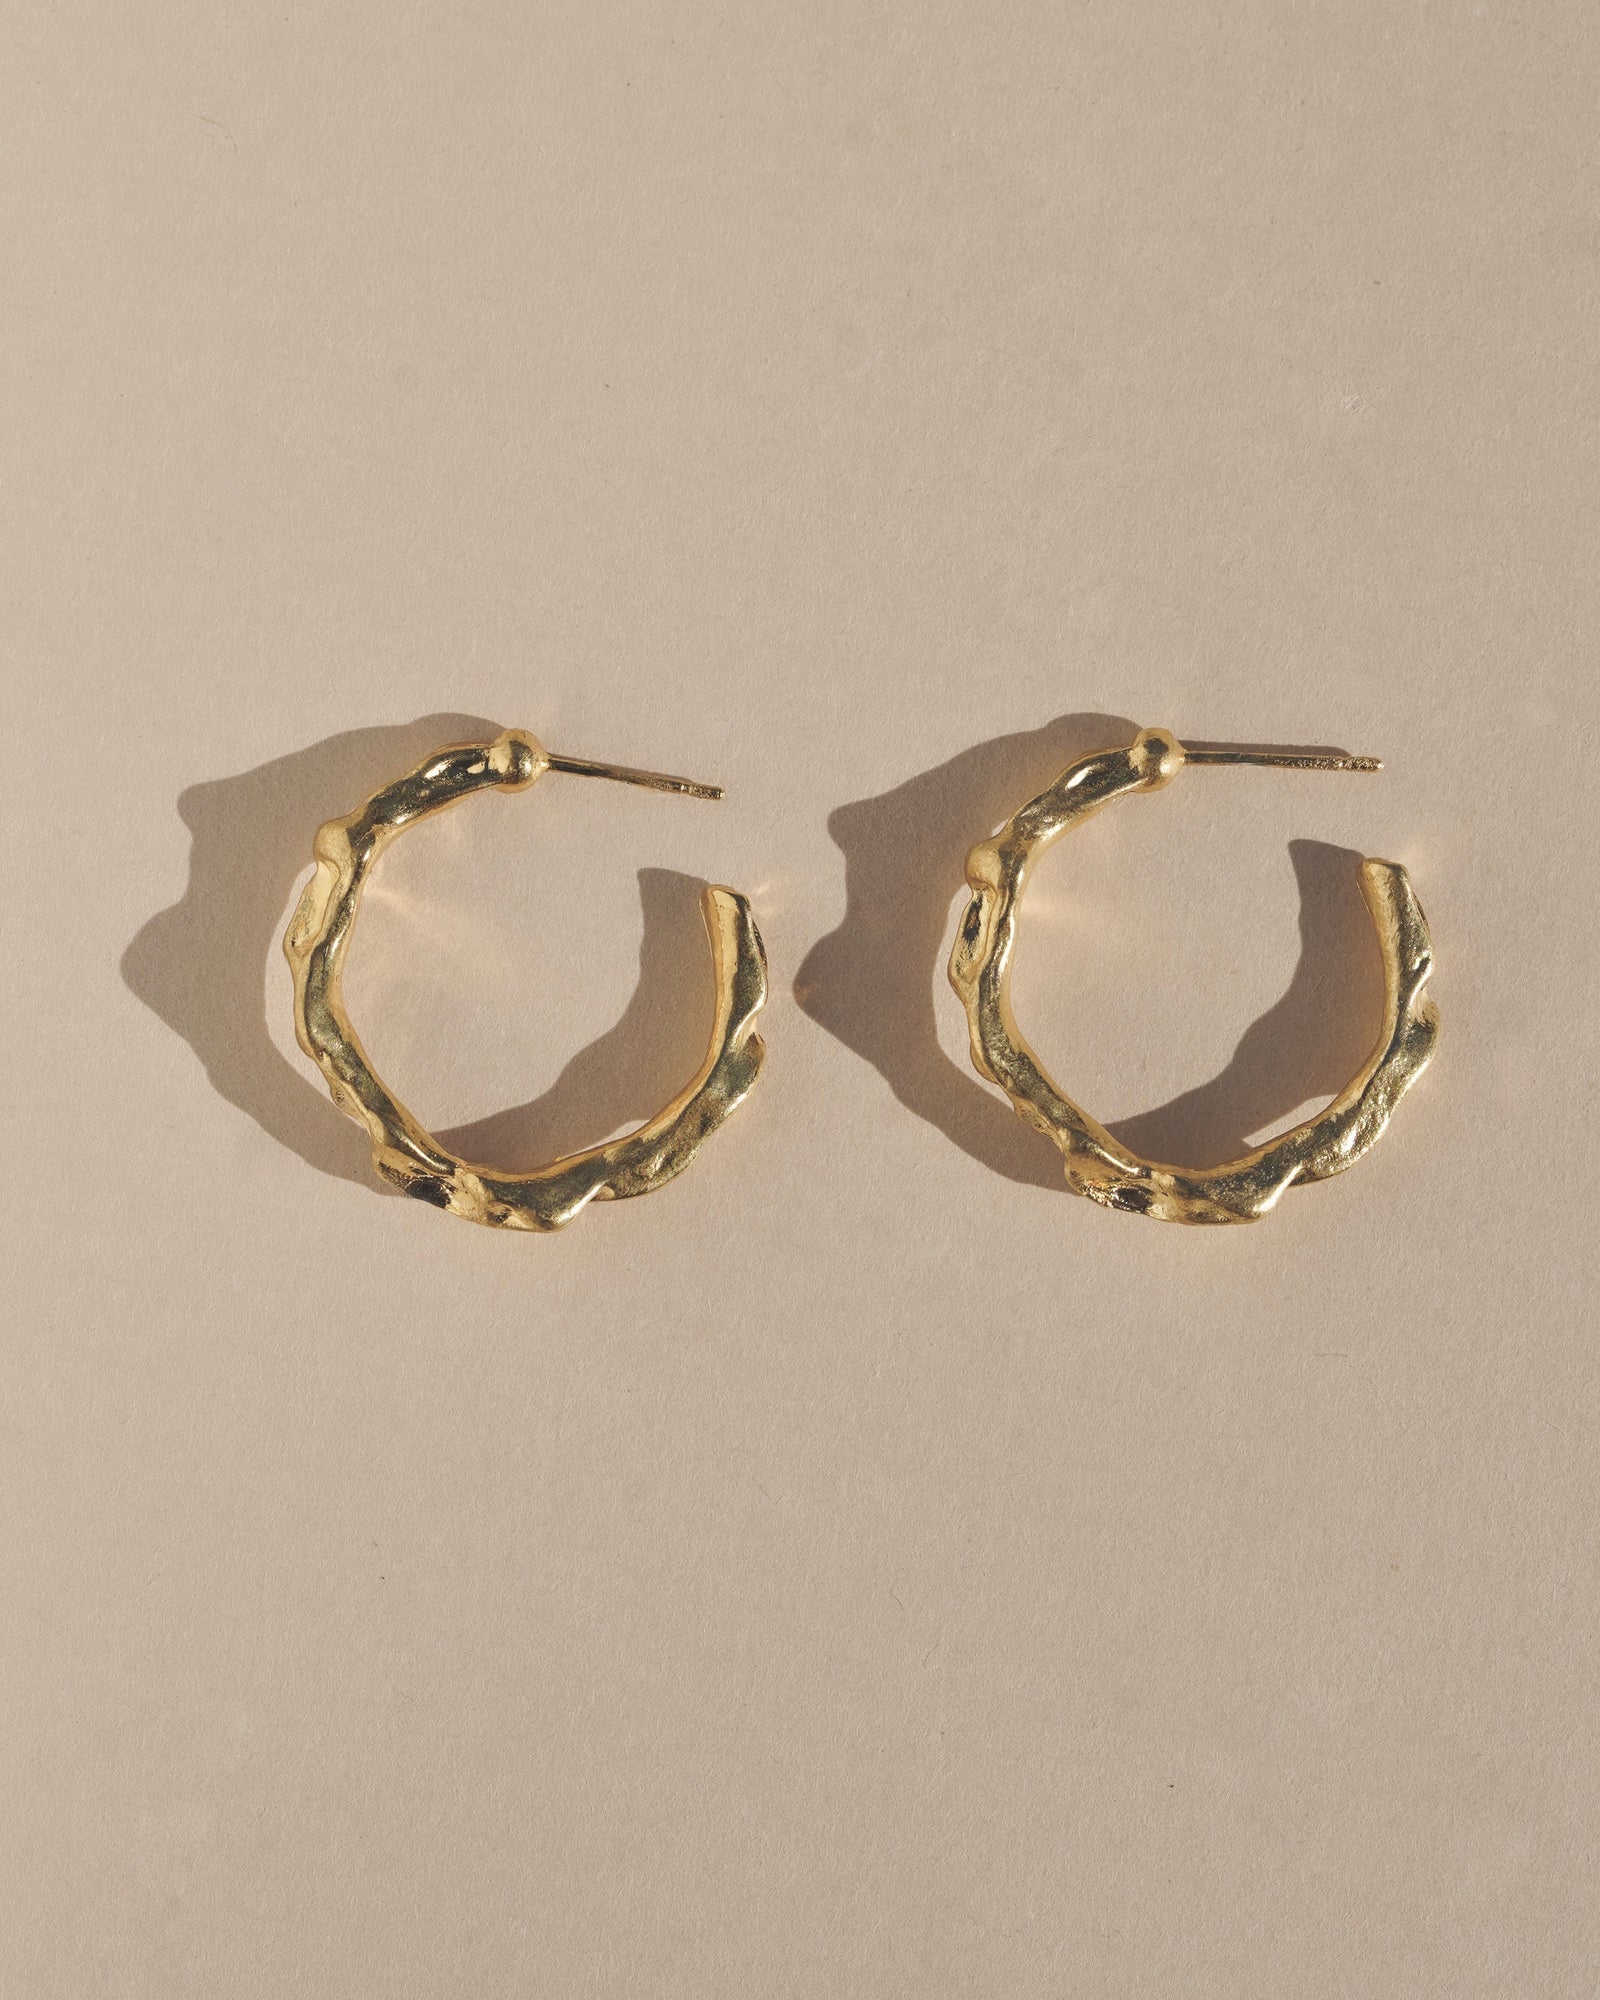 Edgy and modern with lots of texture, these hoops are beautiful and easy to wear. Fluid hoop earrings with wavy dimension in the perfect statement size.    Handmade in the Santa Cruz Mountains.